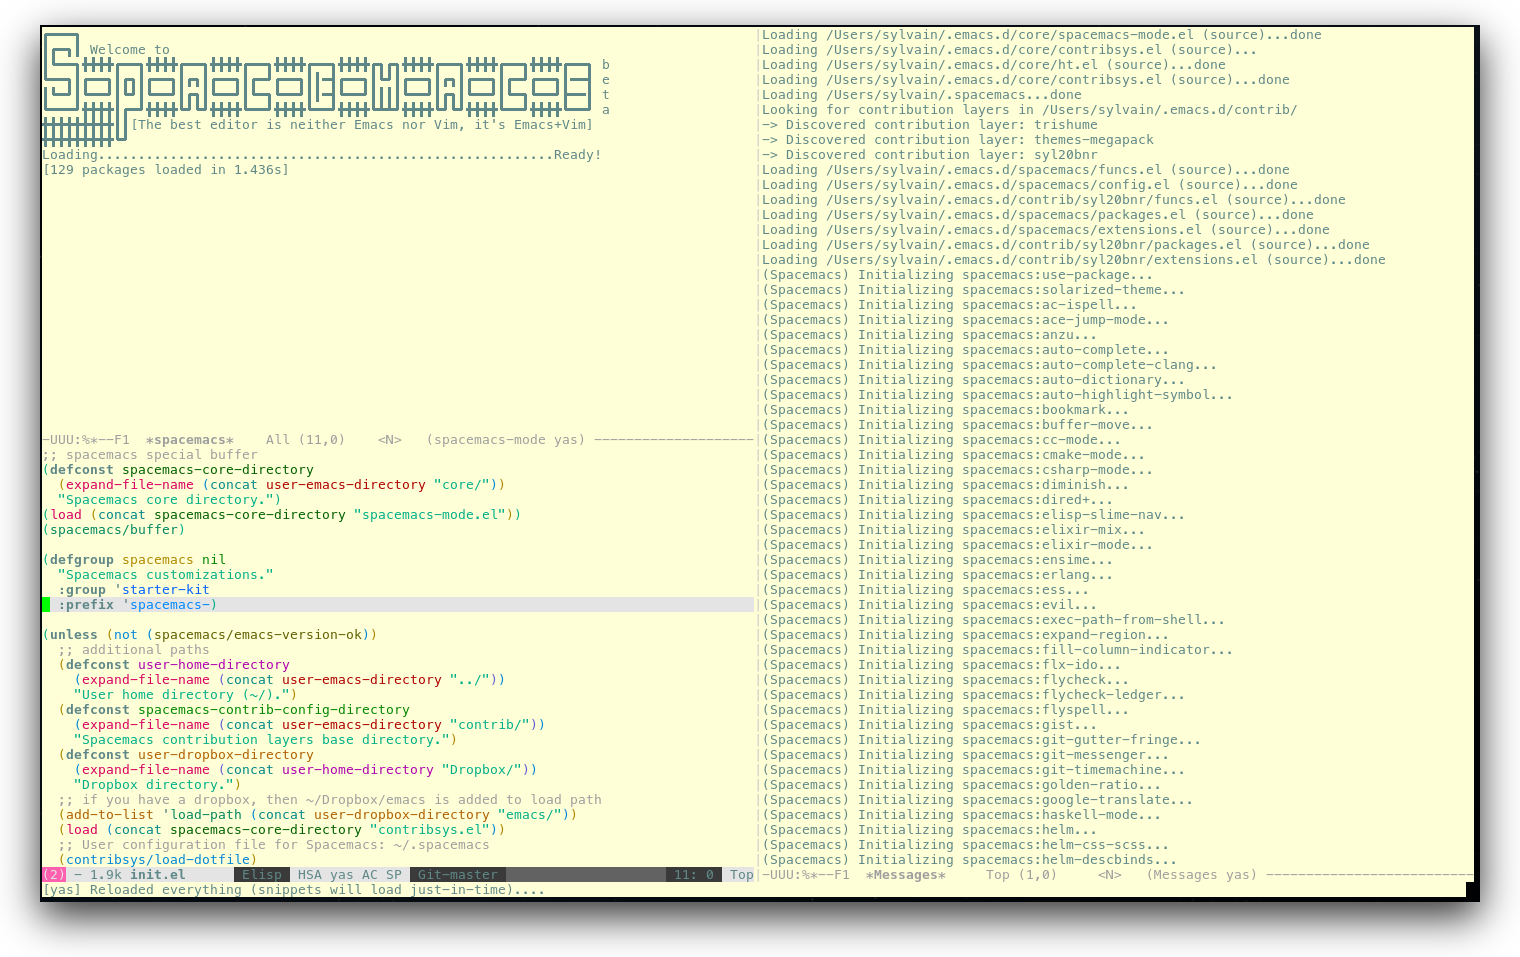 /TakeV/spacemacs/media/commit/812d35a100df6dae03a07cd1cb5a9dba1ff5757c/doc/img/spacemacs-urxvt.png